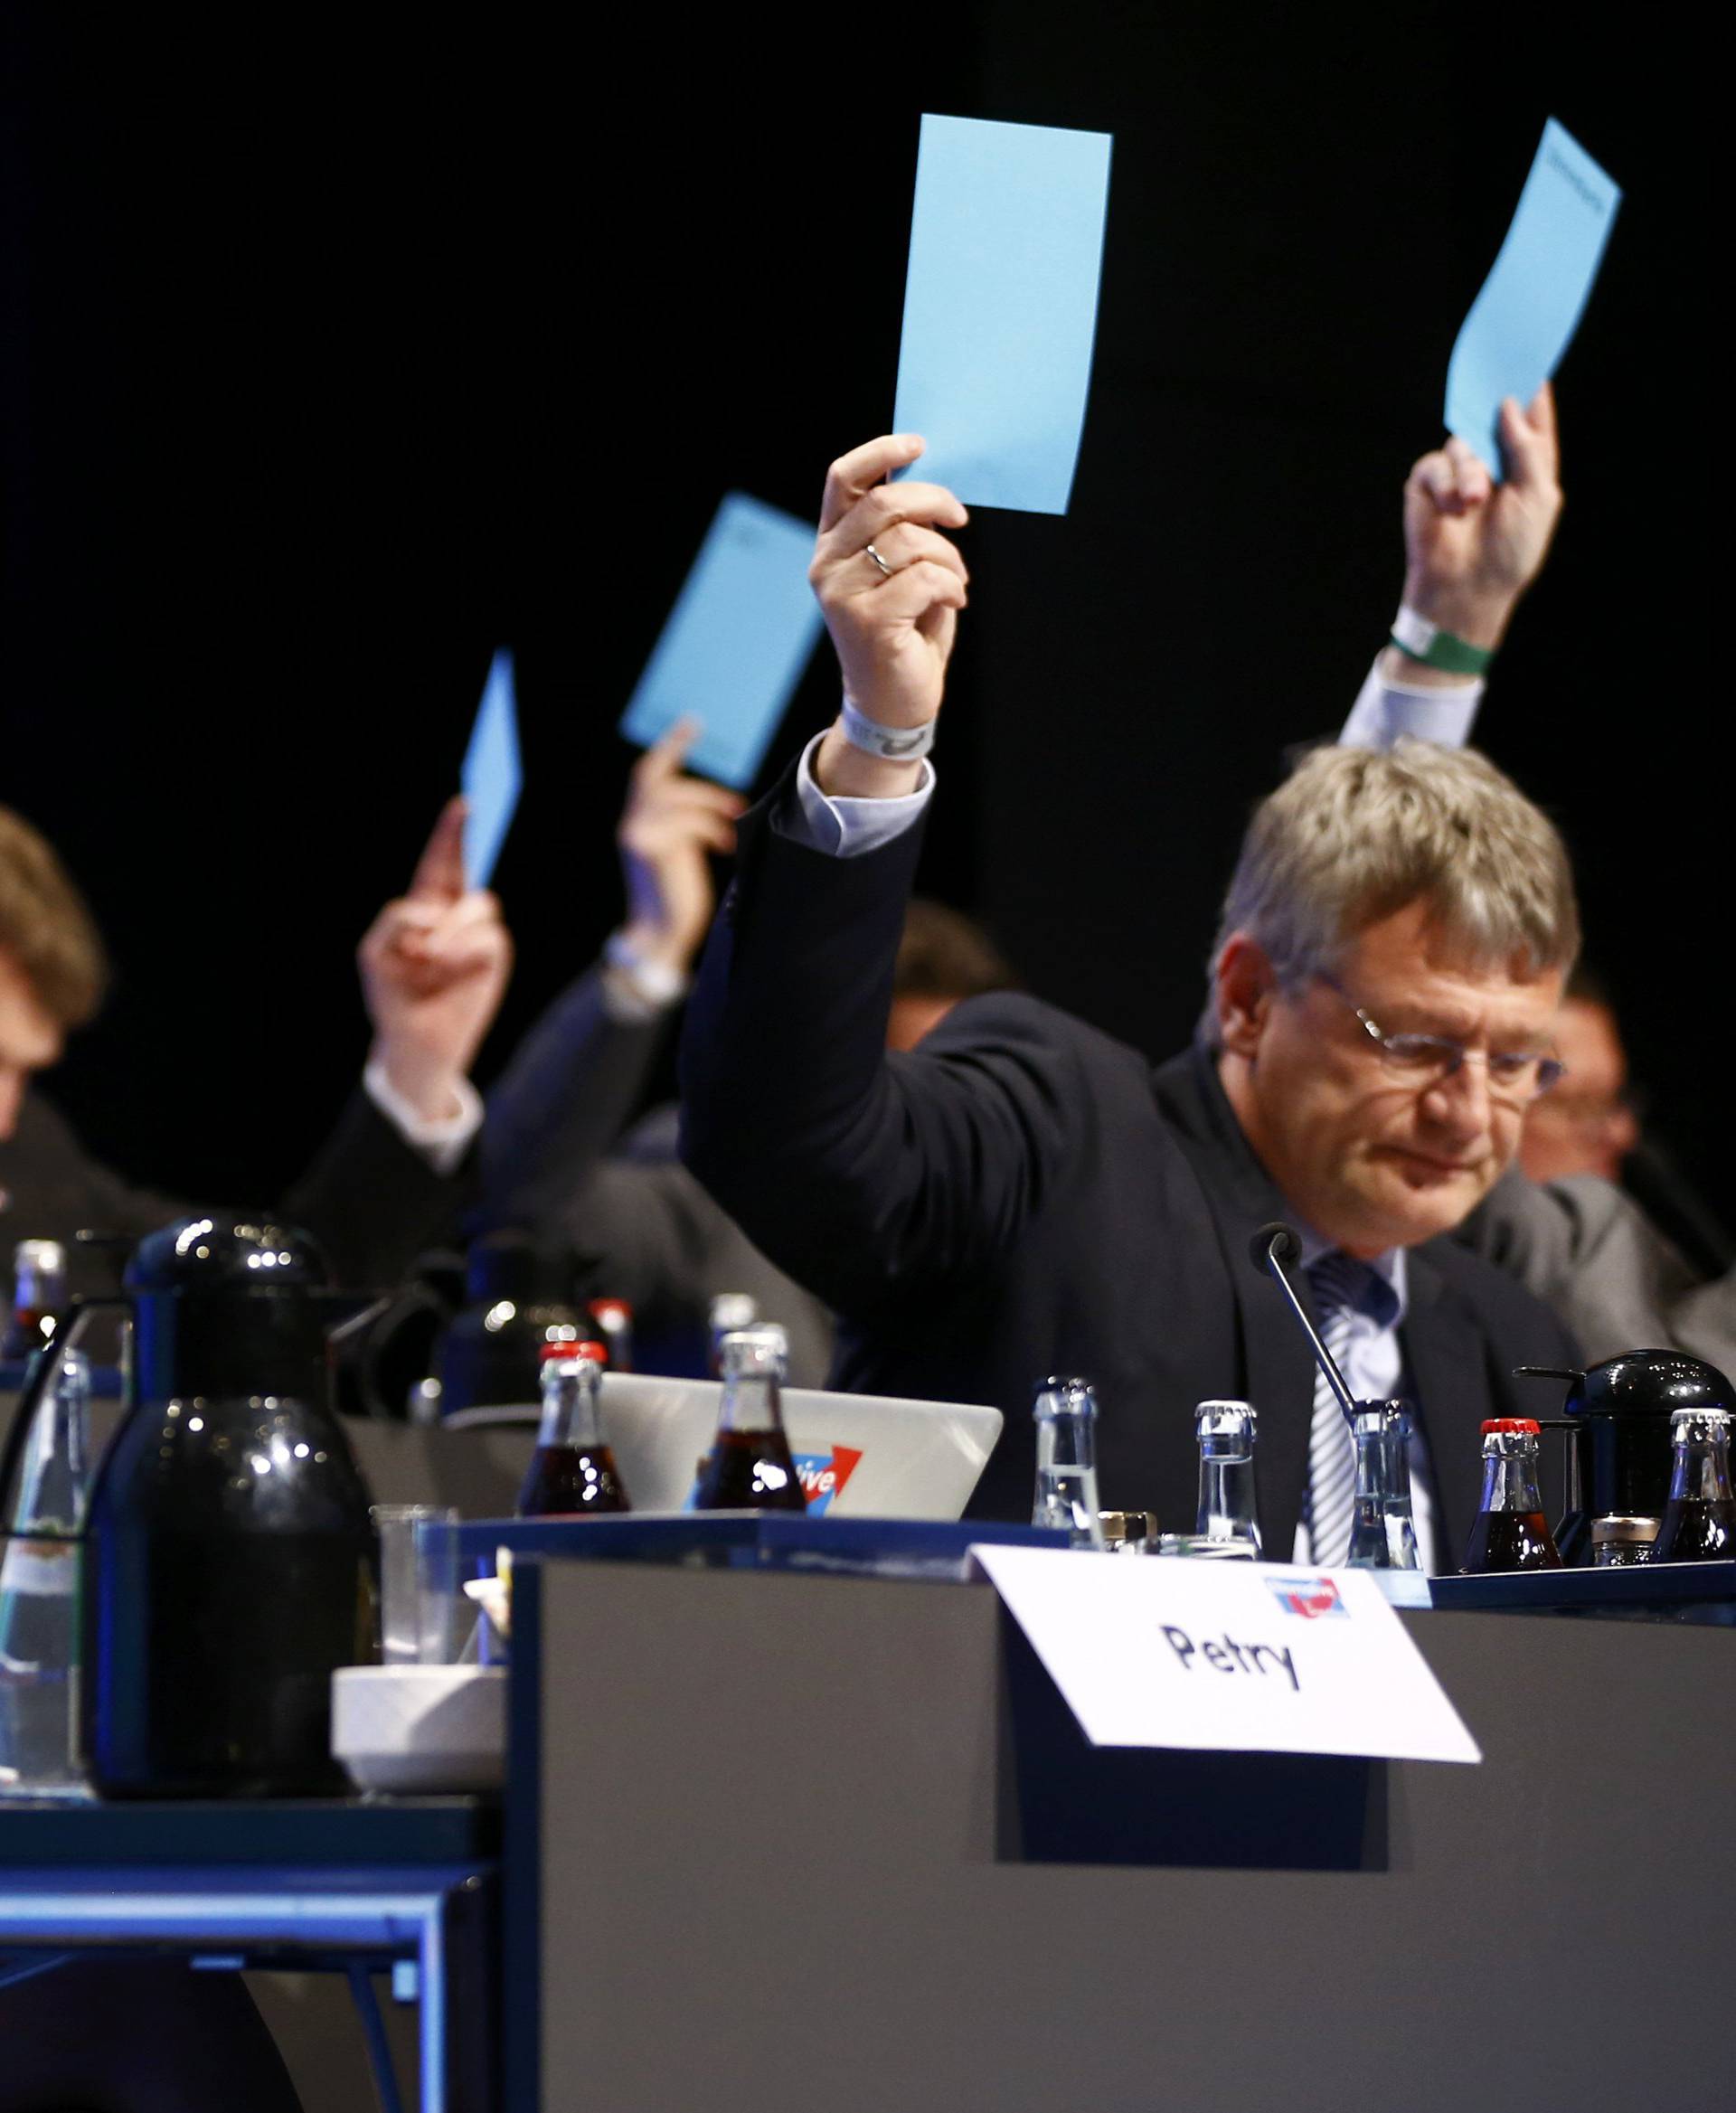 Petry, chairwoman of the anti-immigration party Alternative for Germany (AfD), votes during the AfD congress in Stuttgart